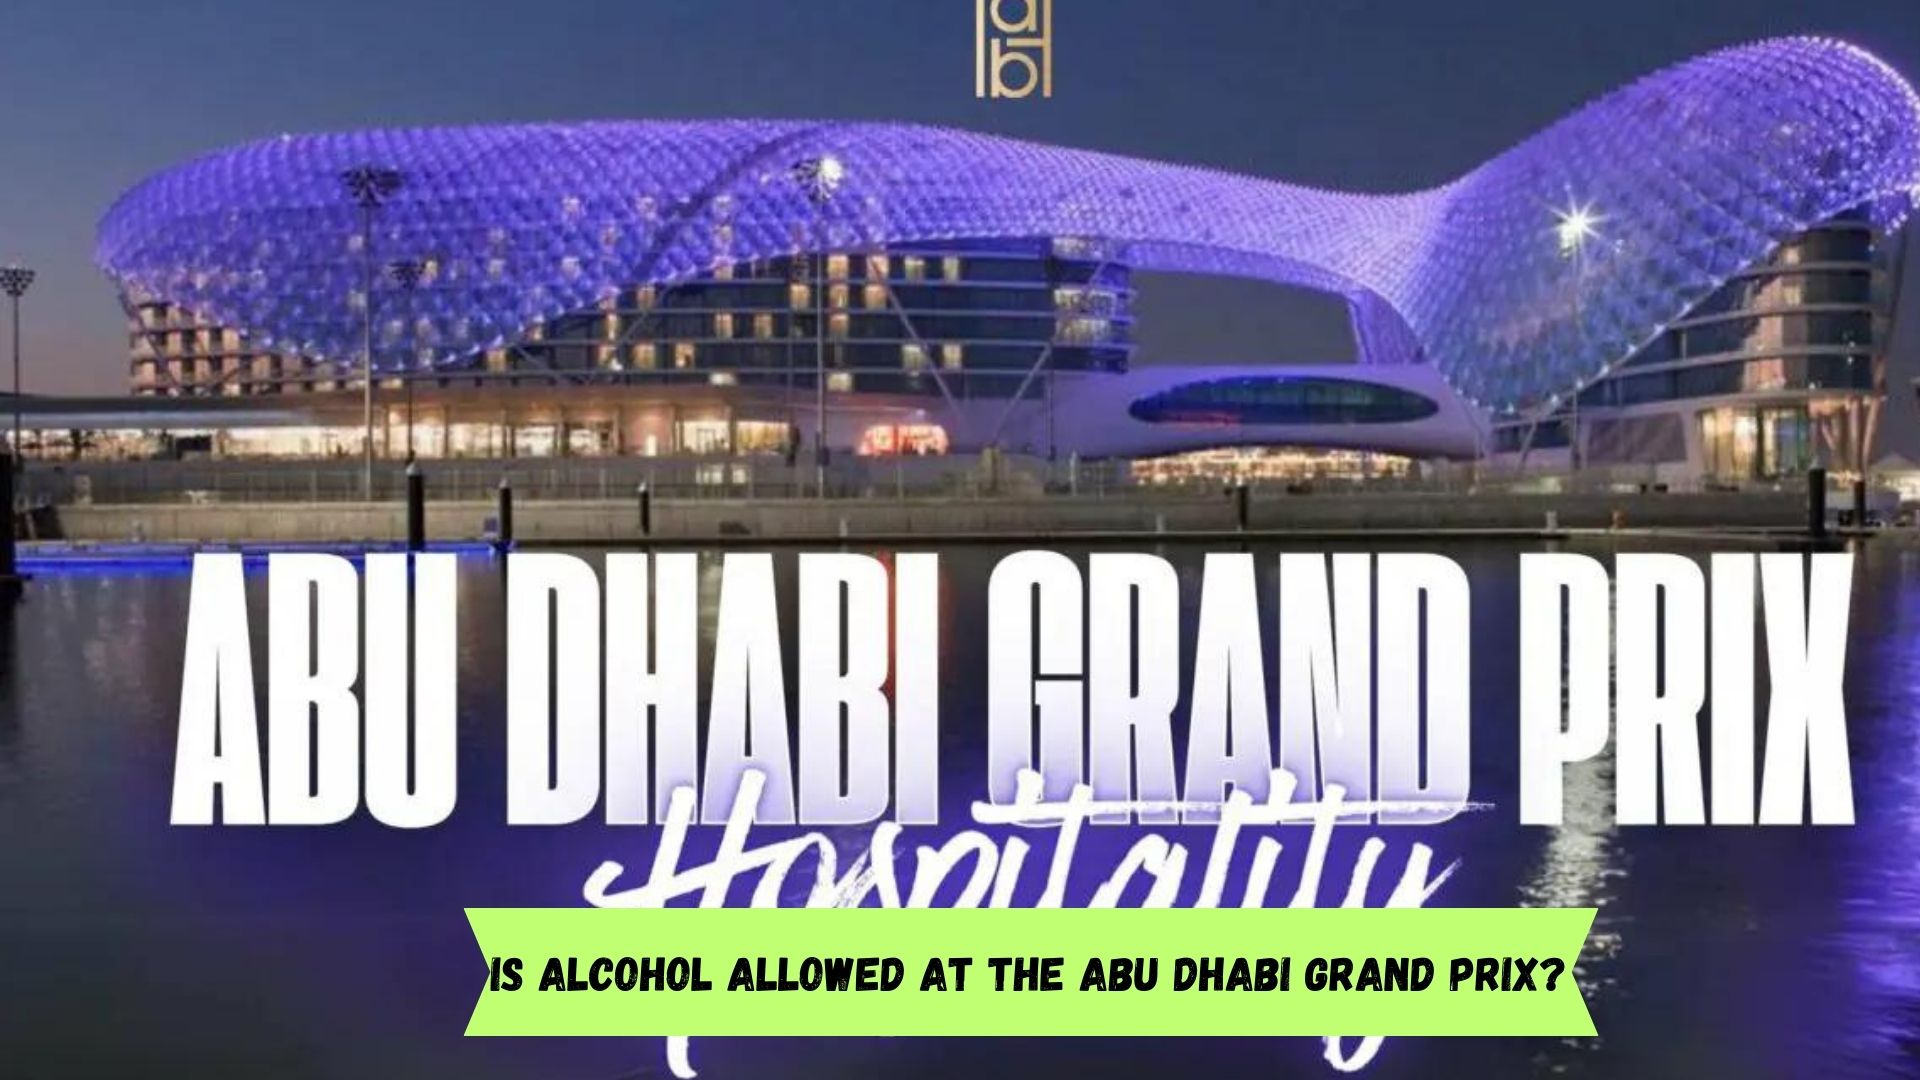 Is alcohol allowed at the Abu Dhabi Grand Prix?